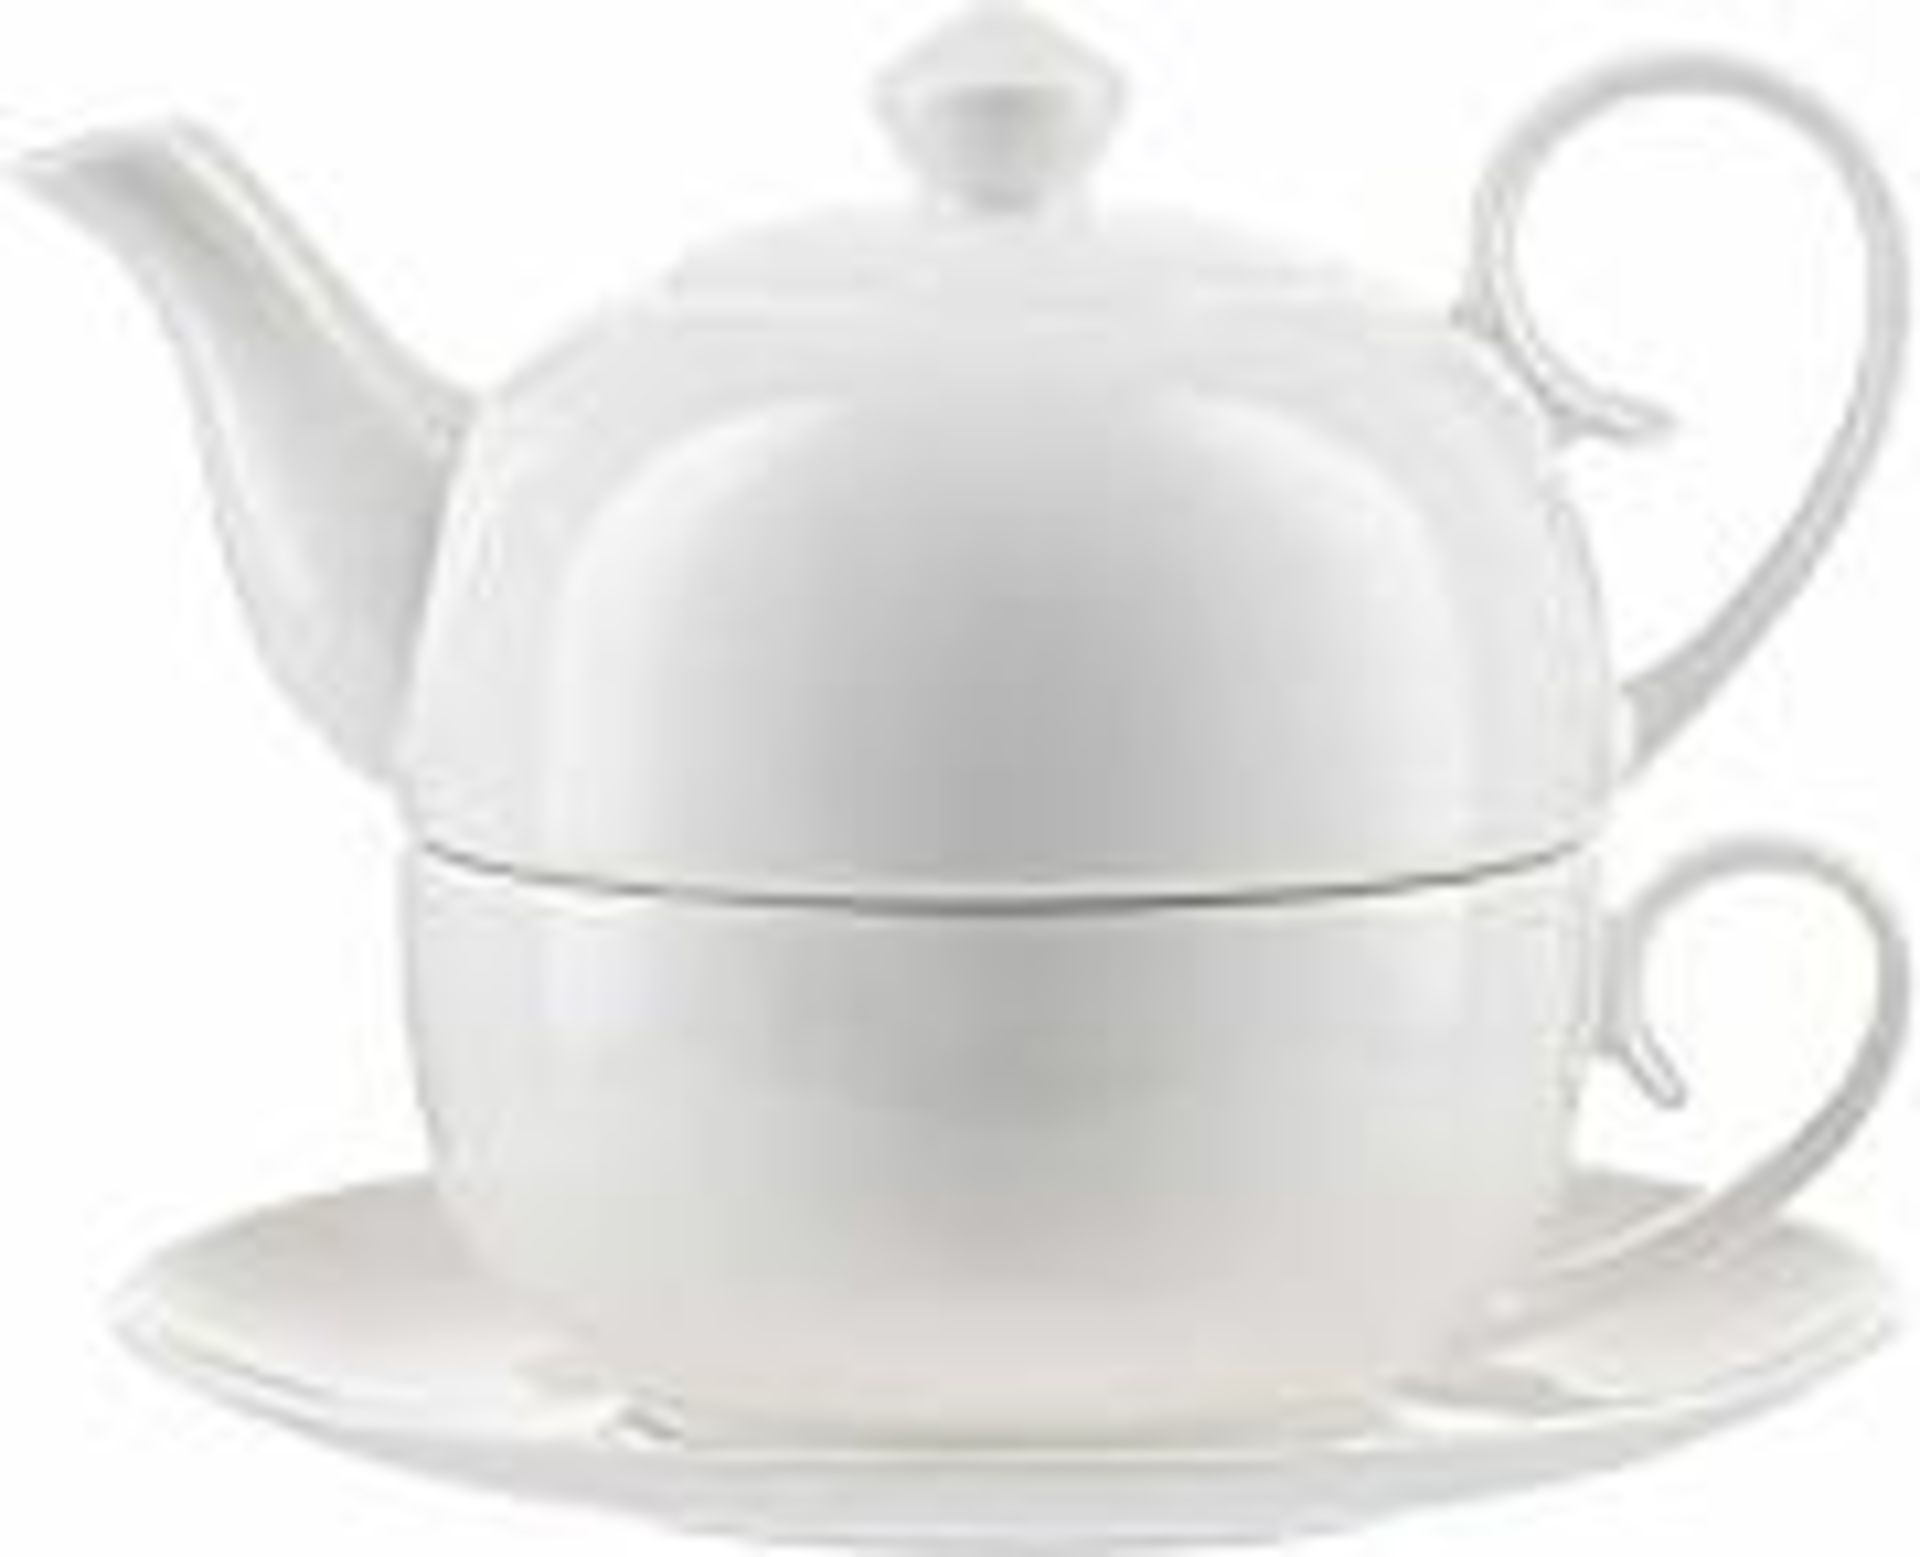 V Brand New Jameson + Tailor White And Silver Manchester Porcelain Tea For One (Similar To Image